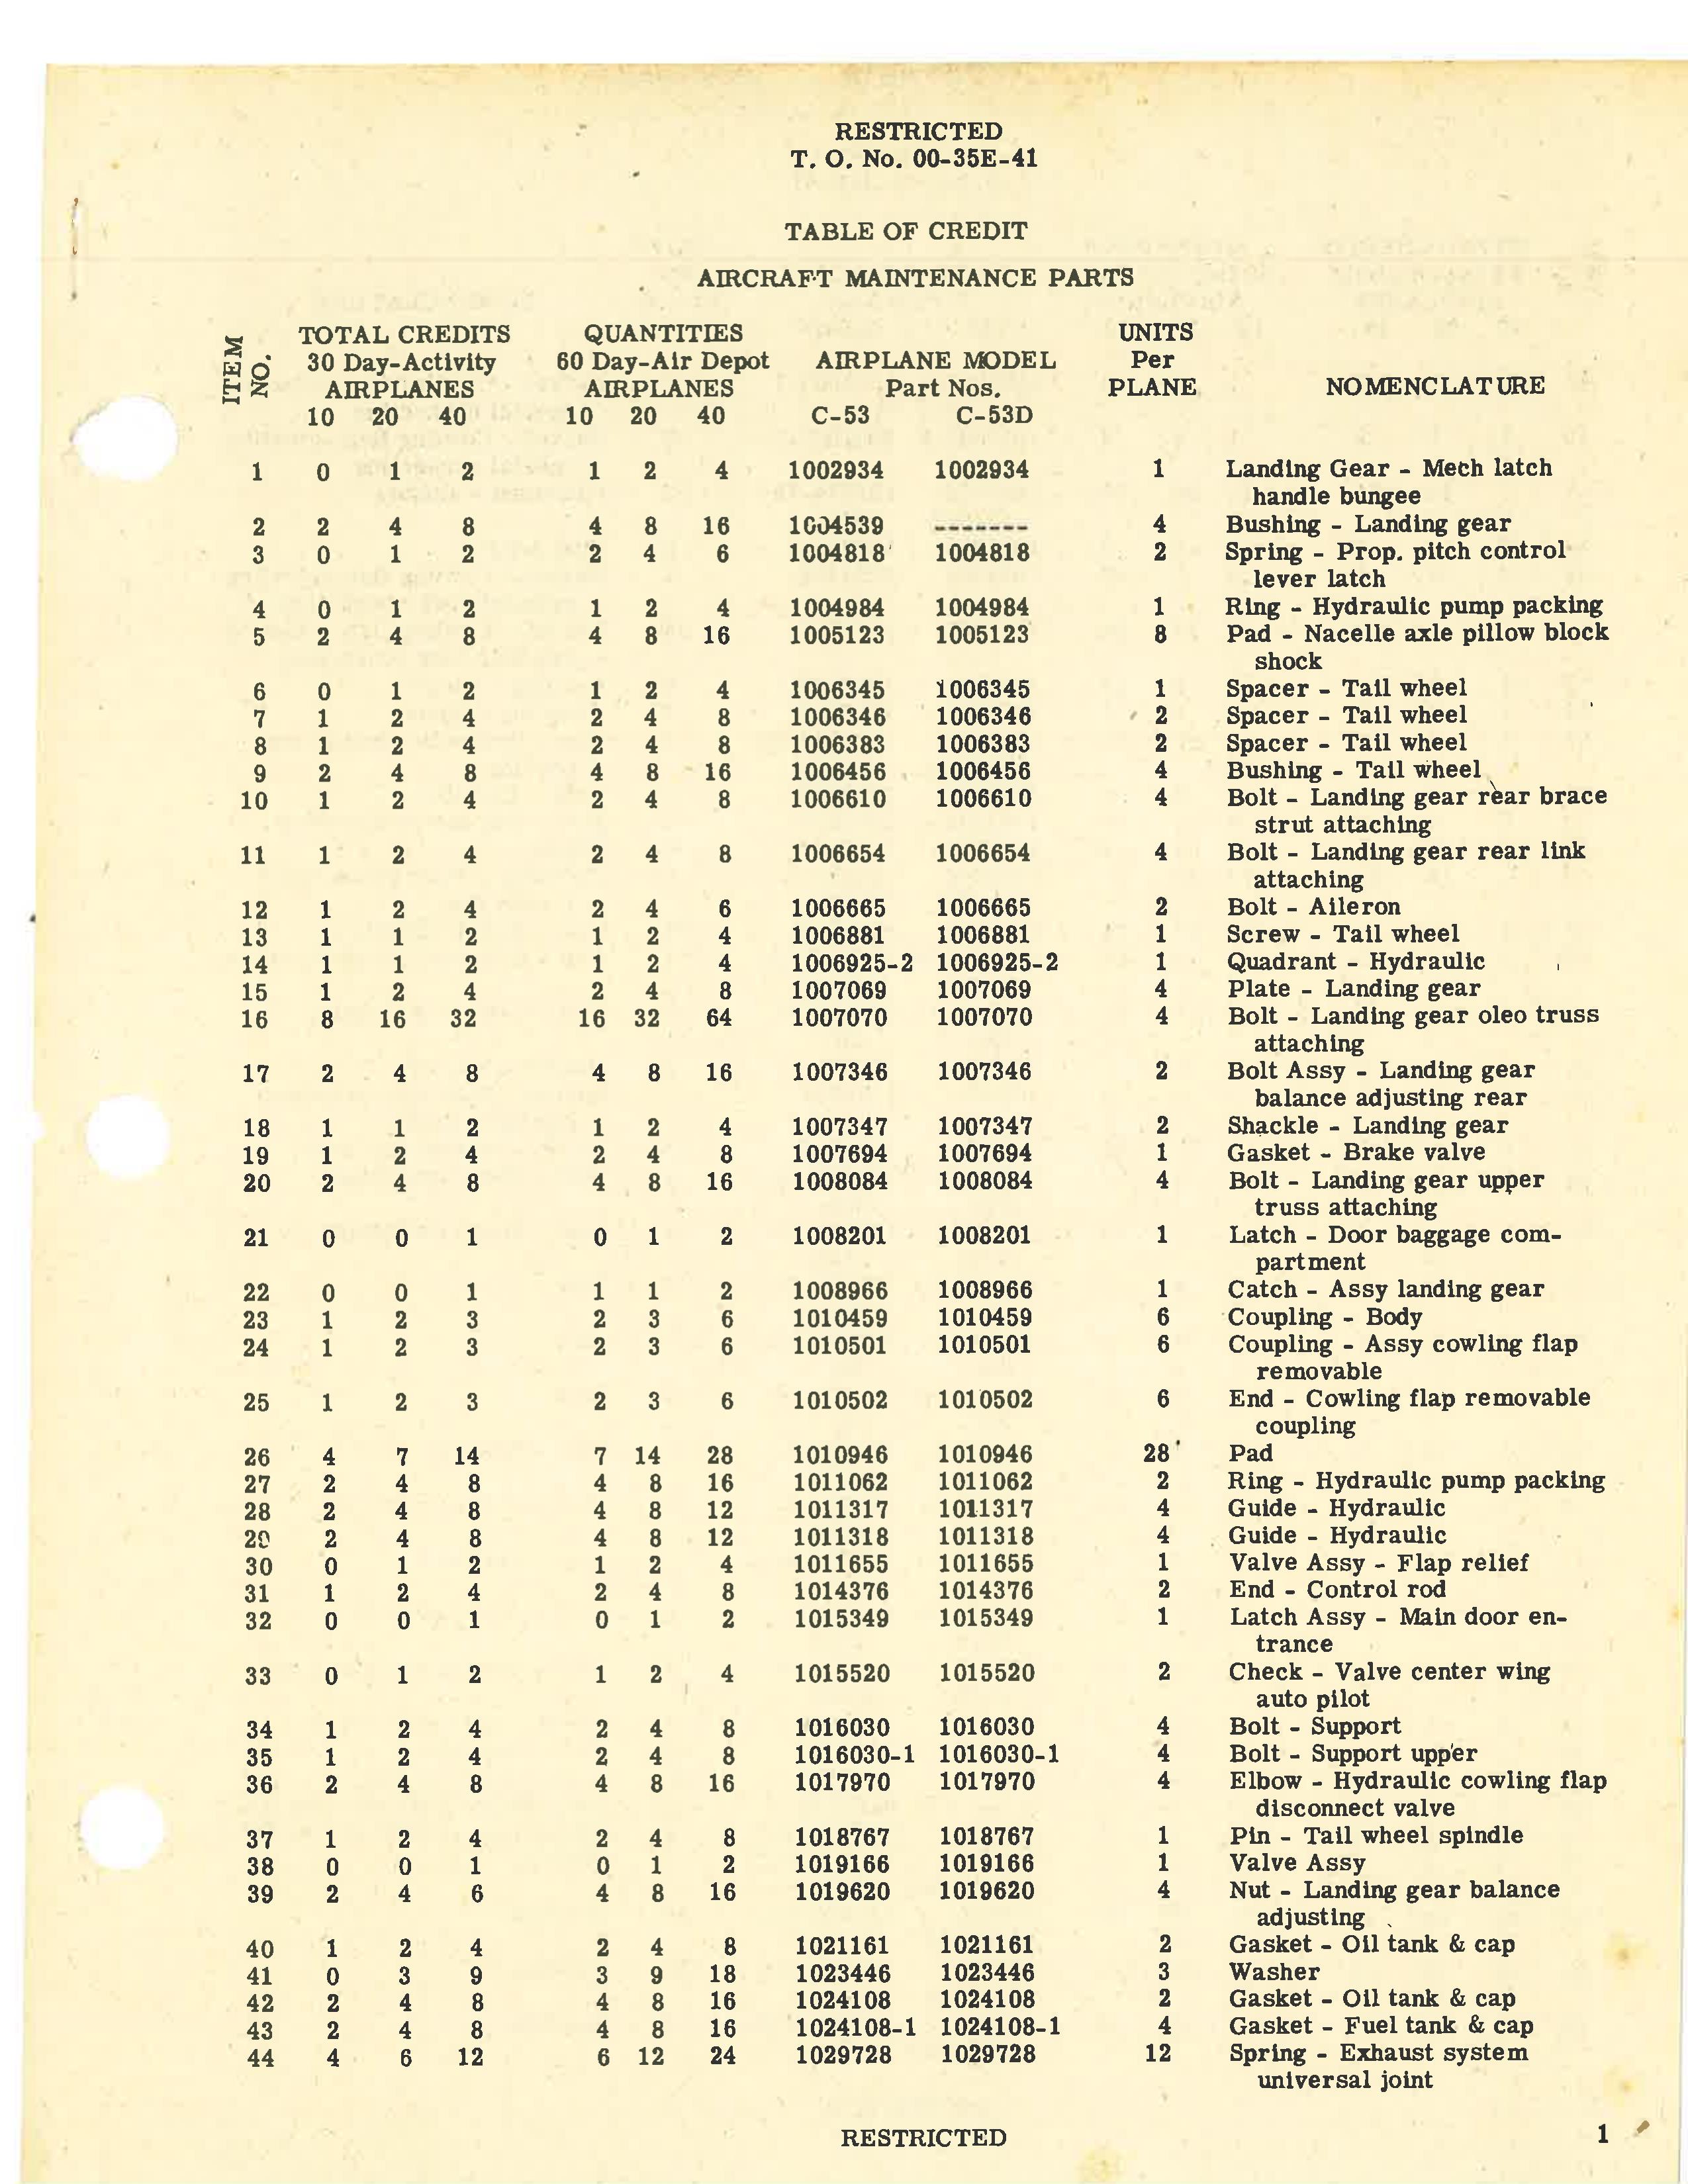 Sample page 3 from AirCorps Library document: Table of Credit Aircraft Maintenance Parts for C-53 and C-53D